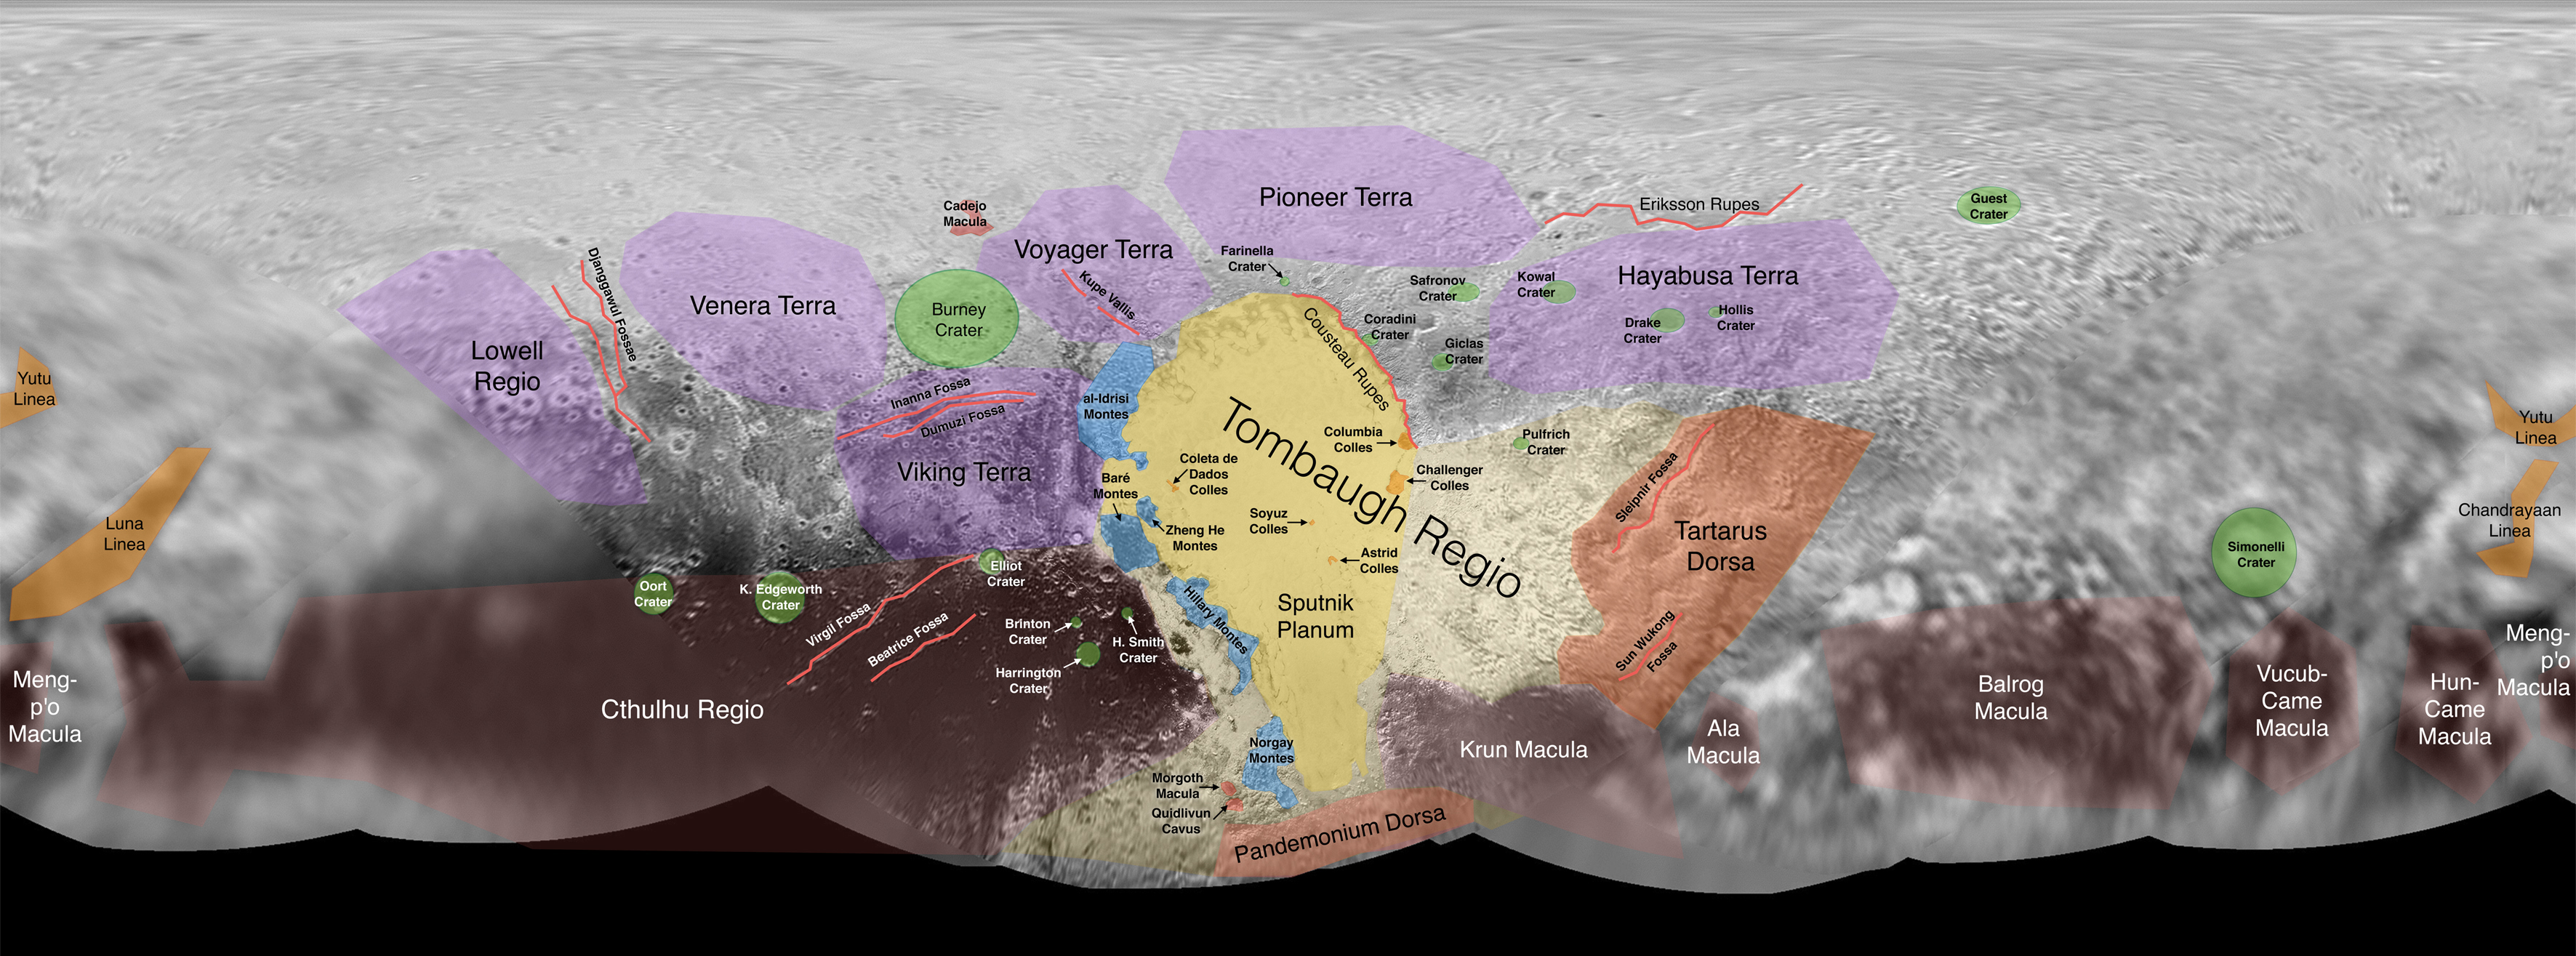 Figure 6: Informal names for regions on Pluto, based on a public naming campaign endorsed by the IAU, in partnership with NASA’s New Horizons mission and the SETI Institute. Credit: NASA/JHUAPL/SwRI/SETI Institute